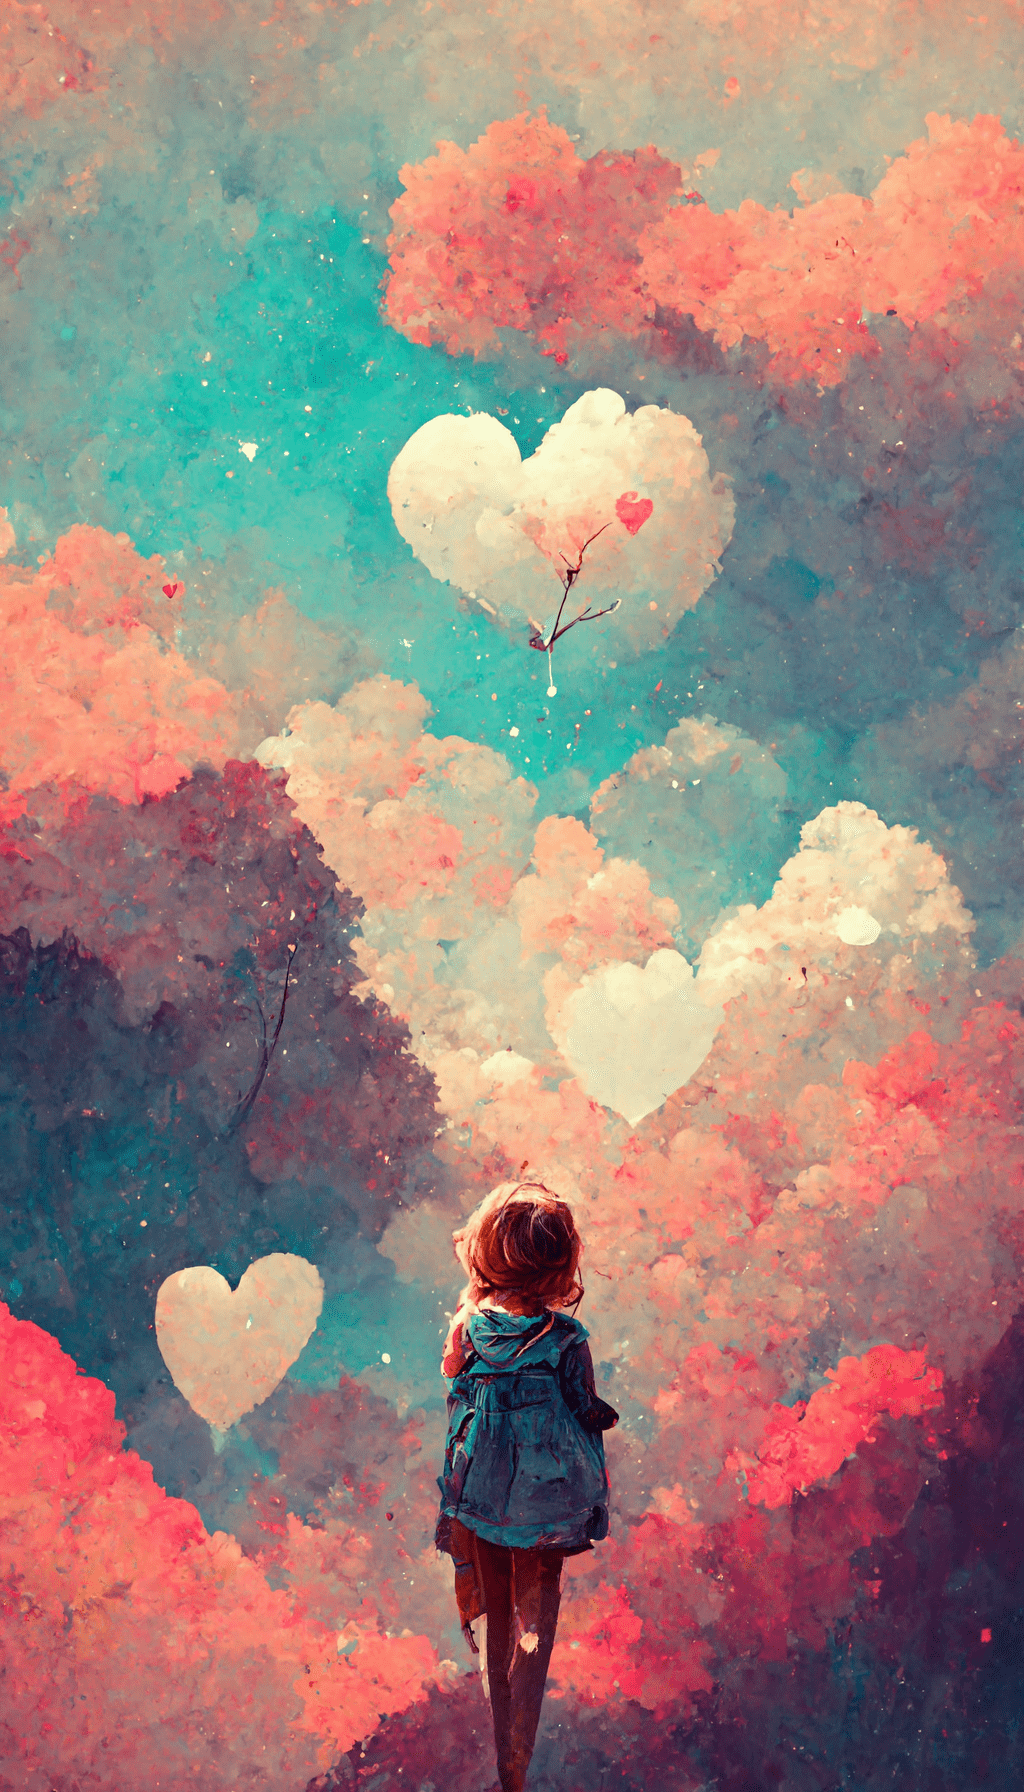 A person walking through the clouds with hearts - Cute, cool, pretty